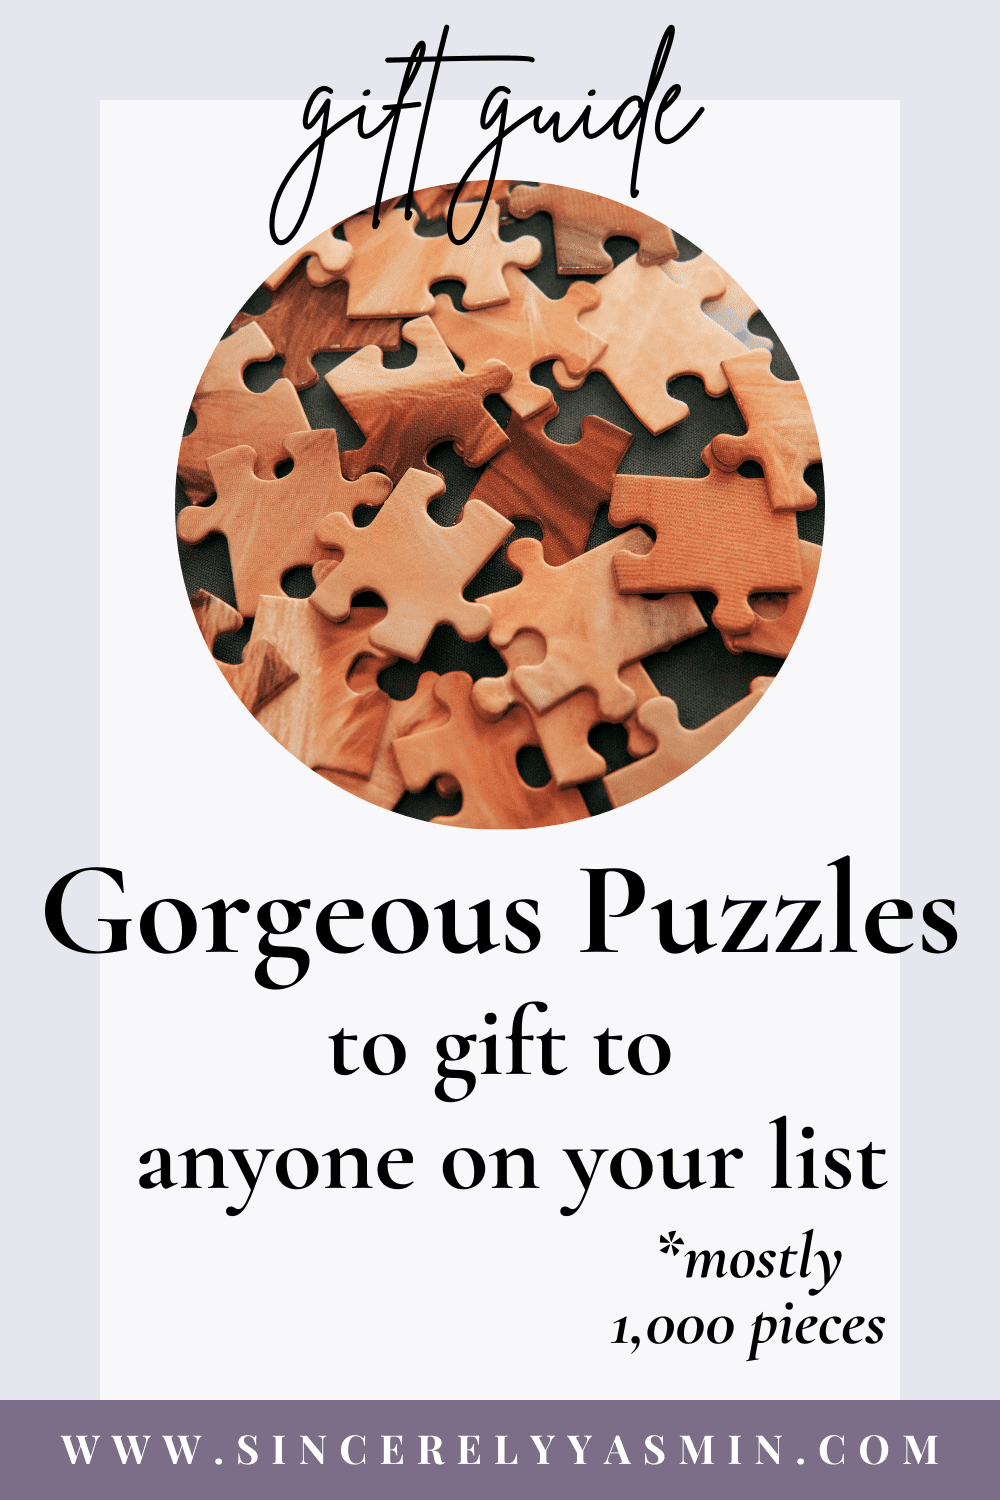 Beautifully Illustrated Puzzles (gift-guide ideas)